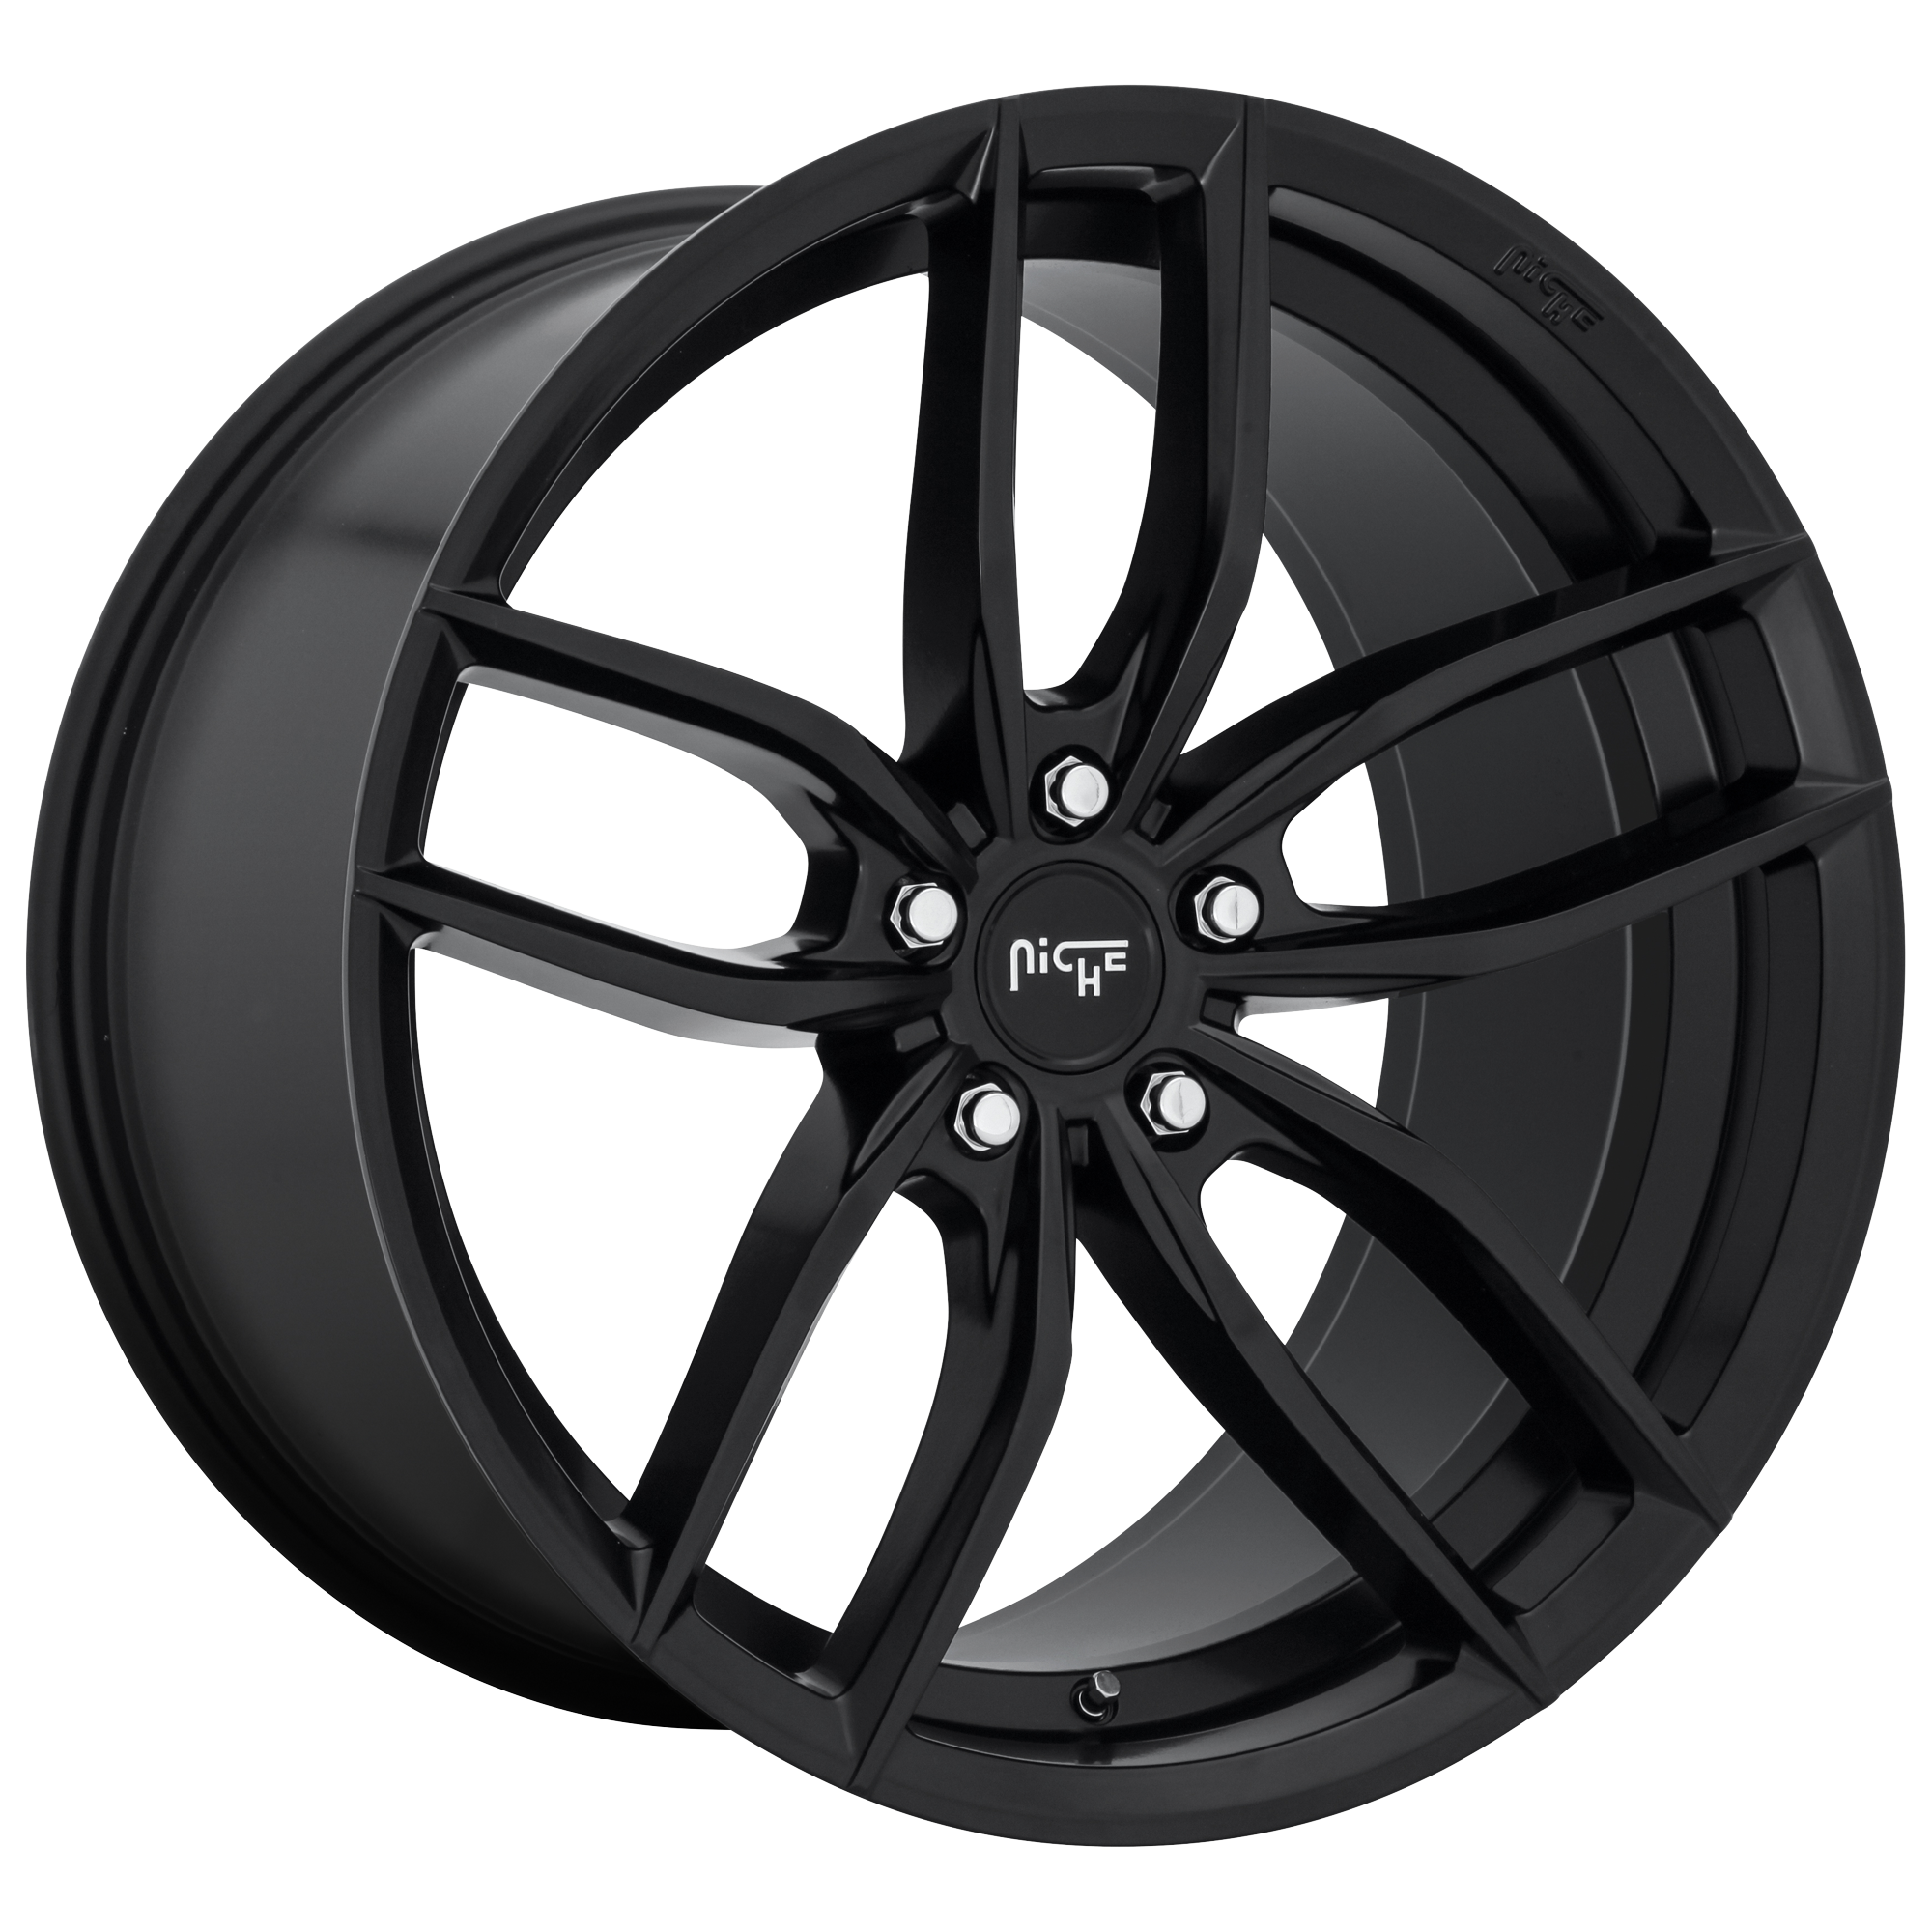 VOSSO 17x8 5x108.00 MATTE BLACK (40 mm) - Tires and Engine Performance